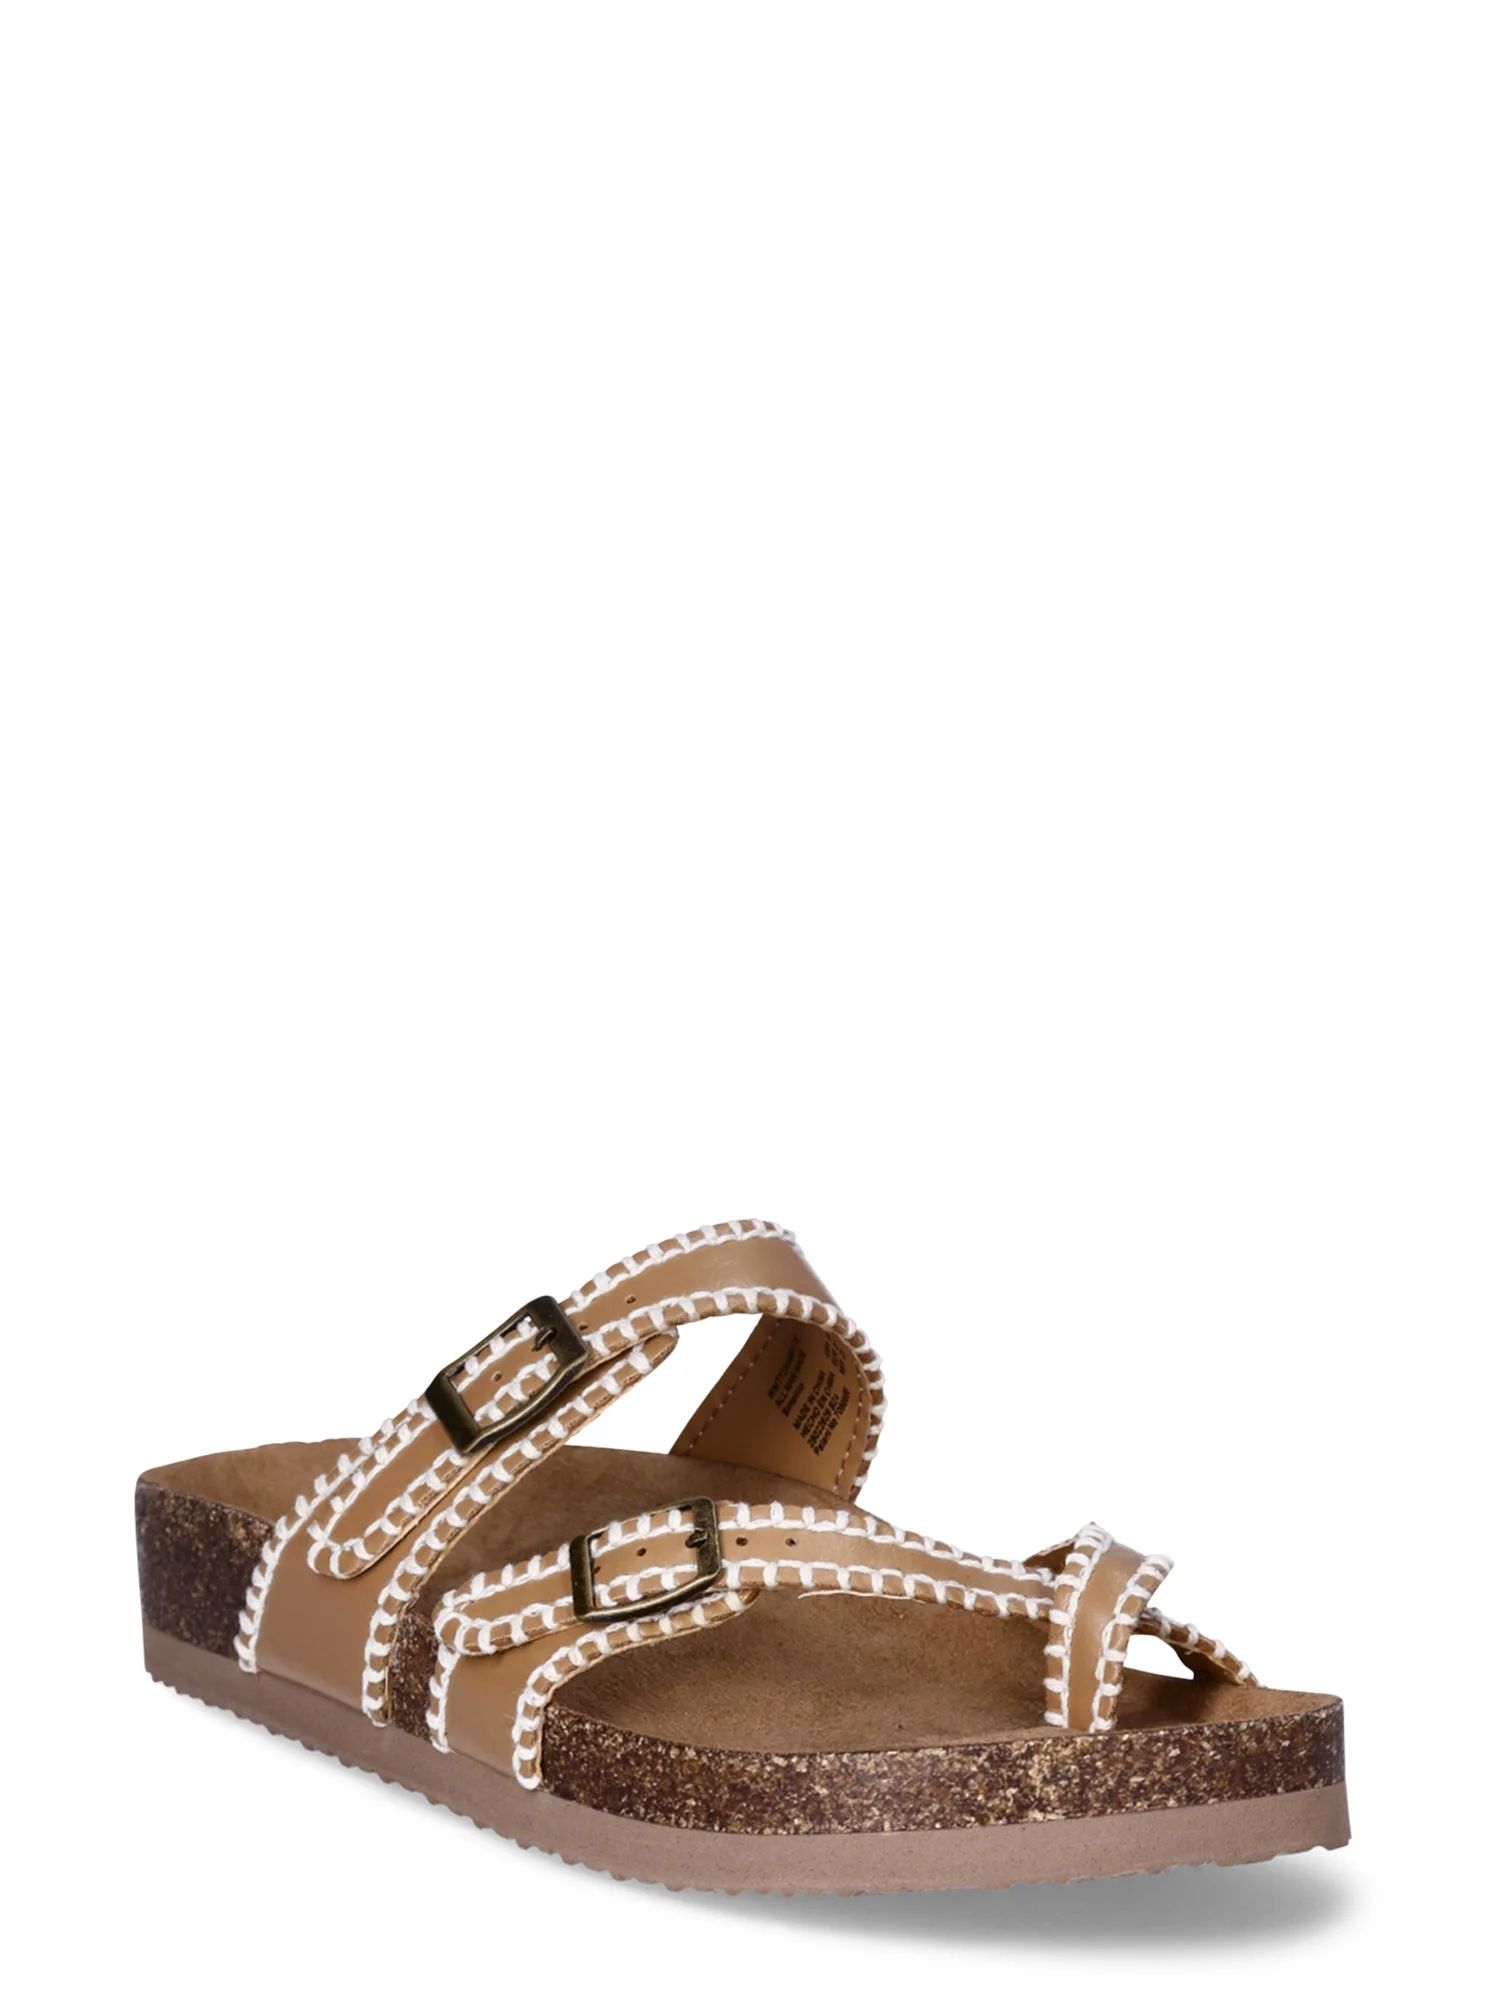 Time and Tru Women's Asymmetric Strap Footbed Sandals, Sizes 6-11 | Walmart (US)